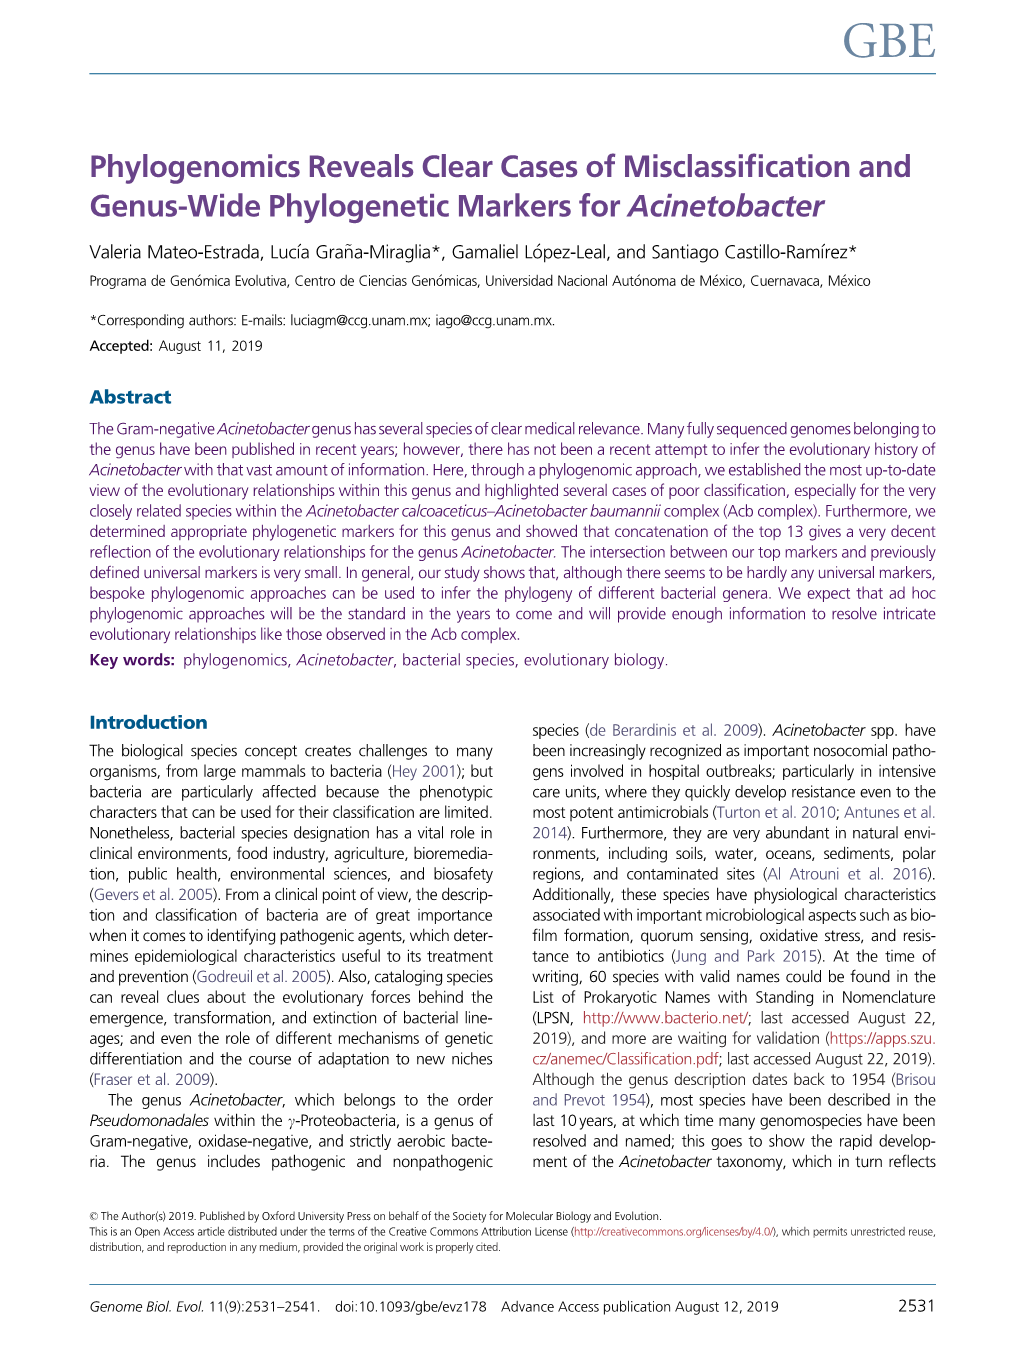 Phylogenomics Reveals Clear Cases of Misclassiﬁcation and Genus-Wide Phylogenetic Markers for Acinetobacter